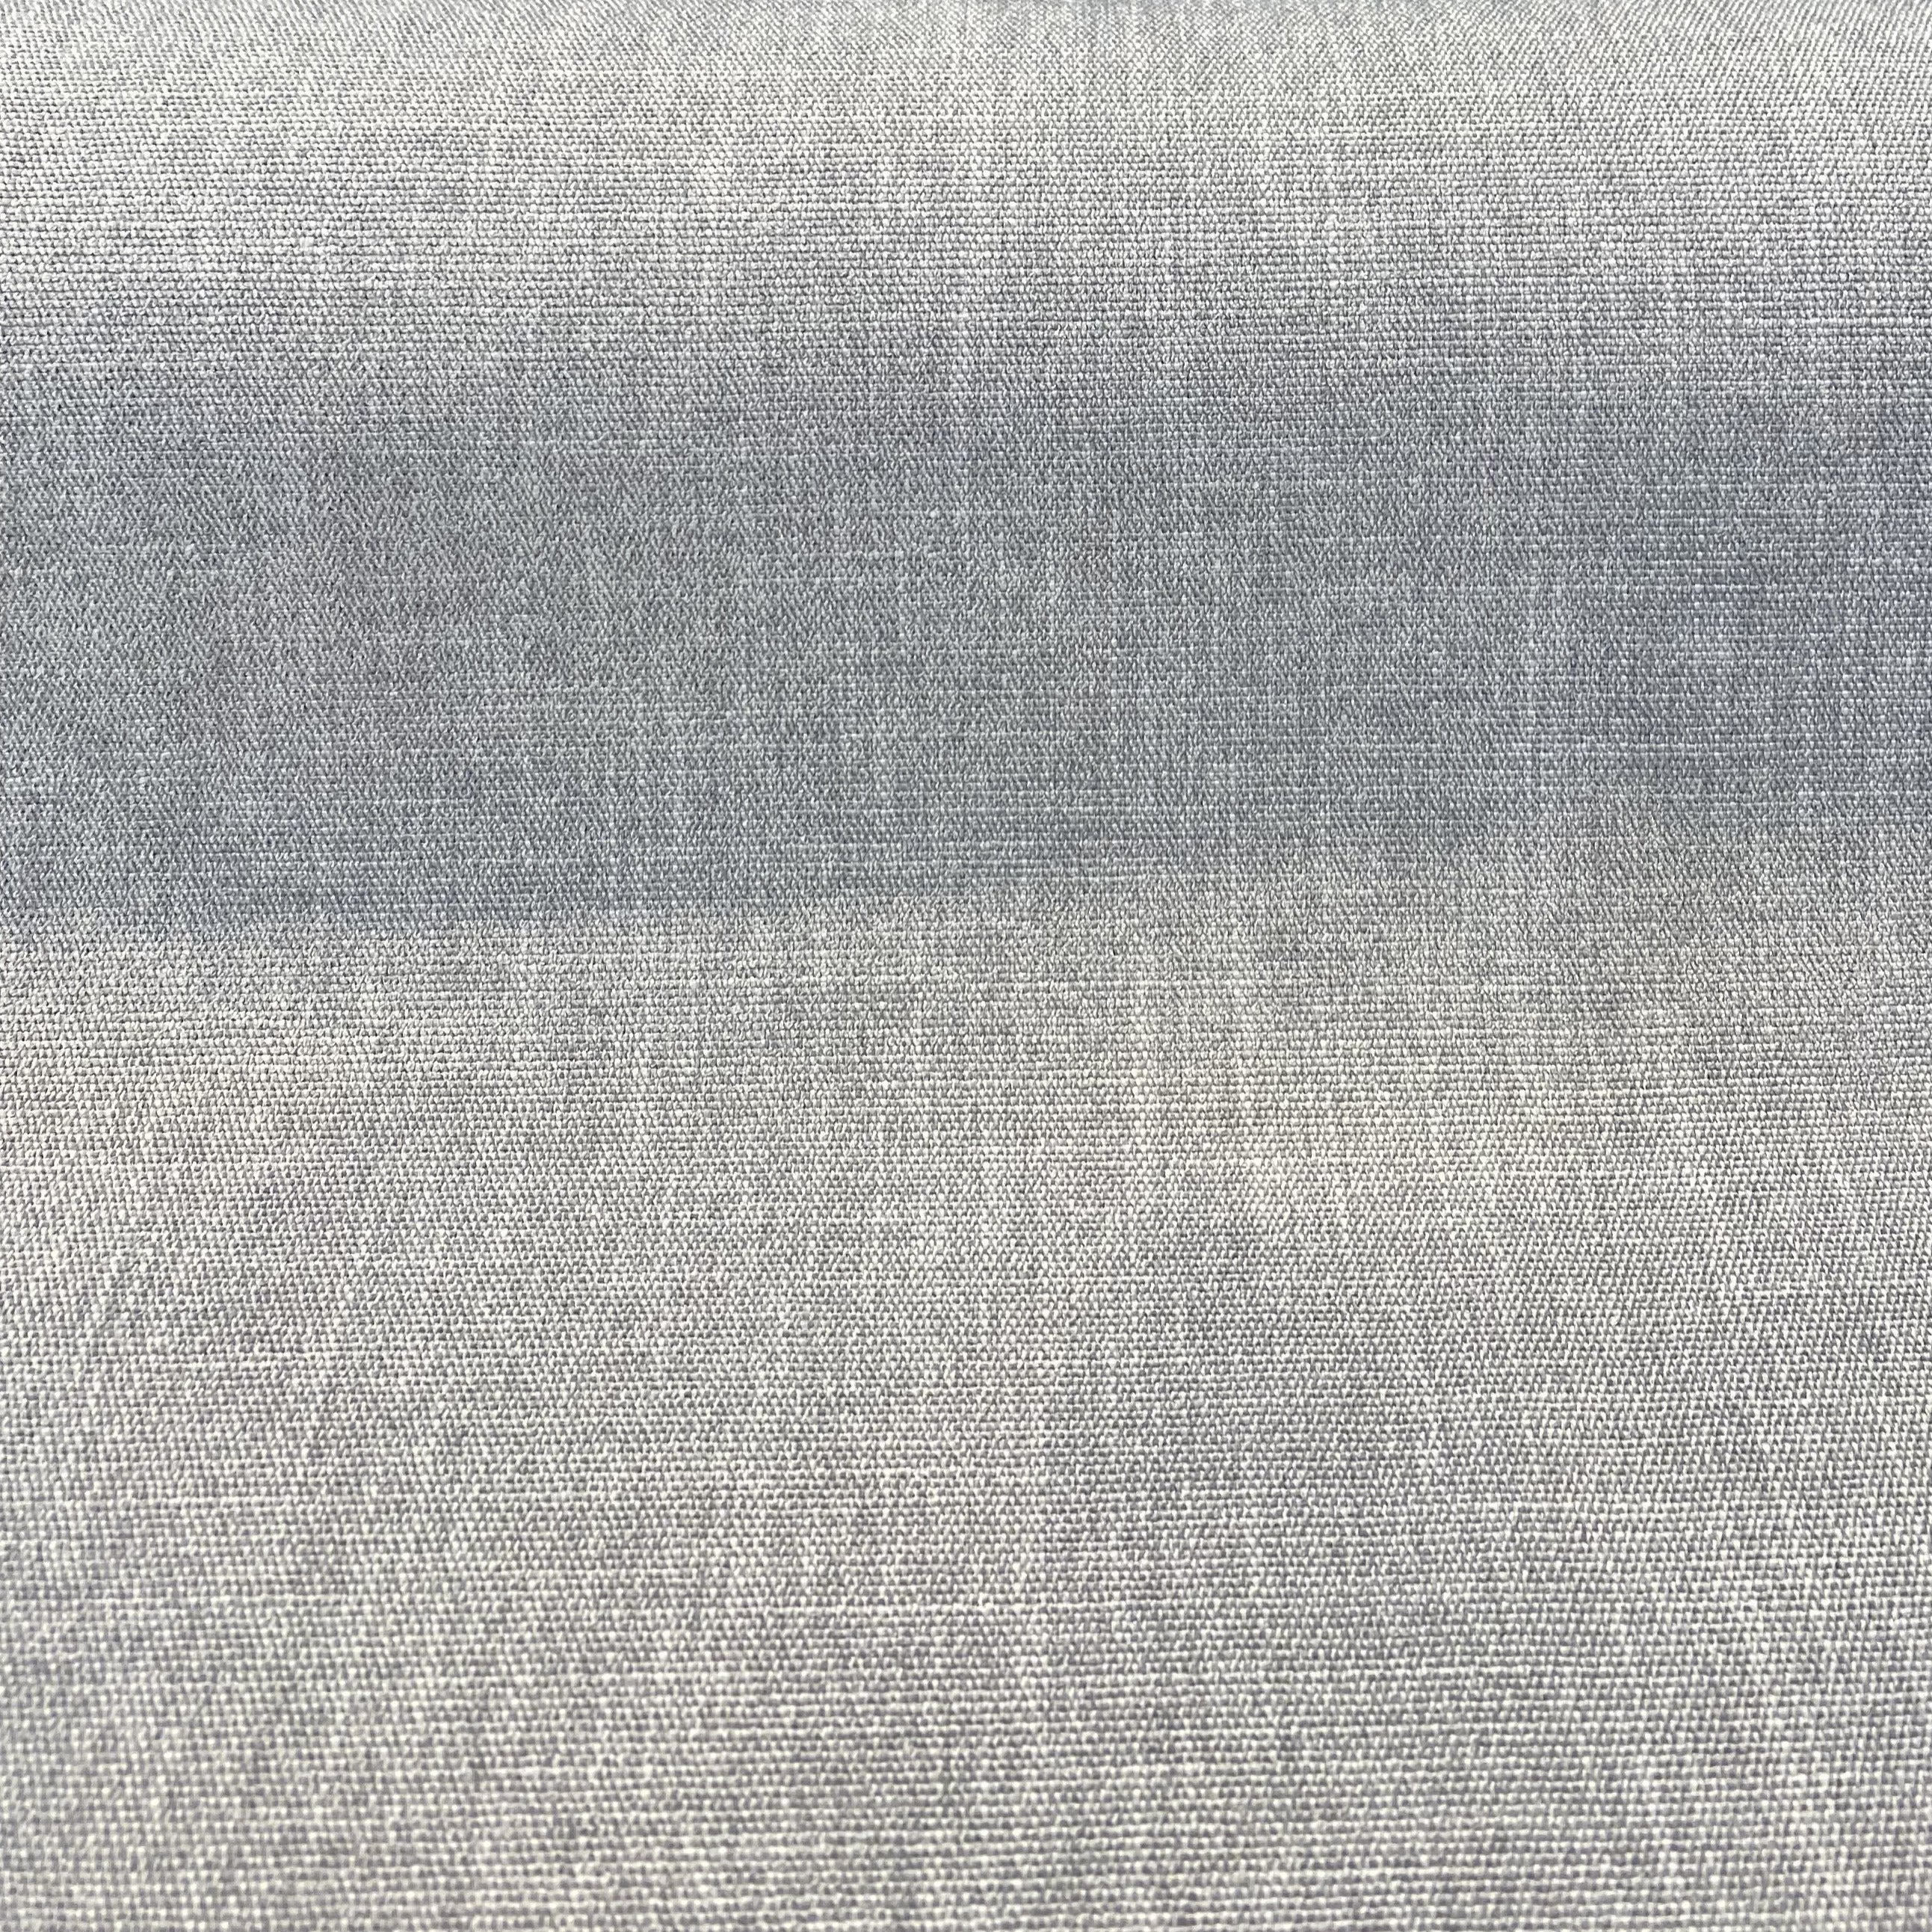 The texture of gray fabric textile upholstery of furniture